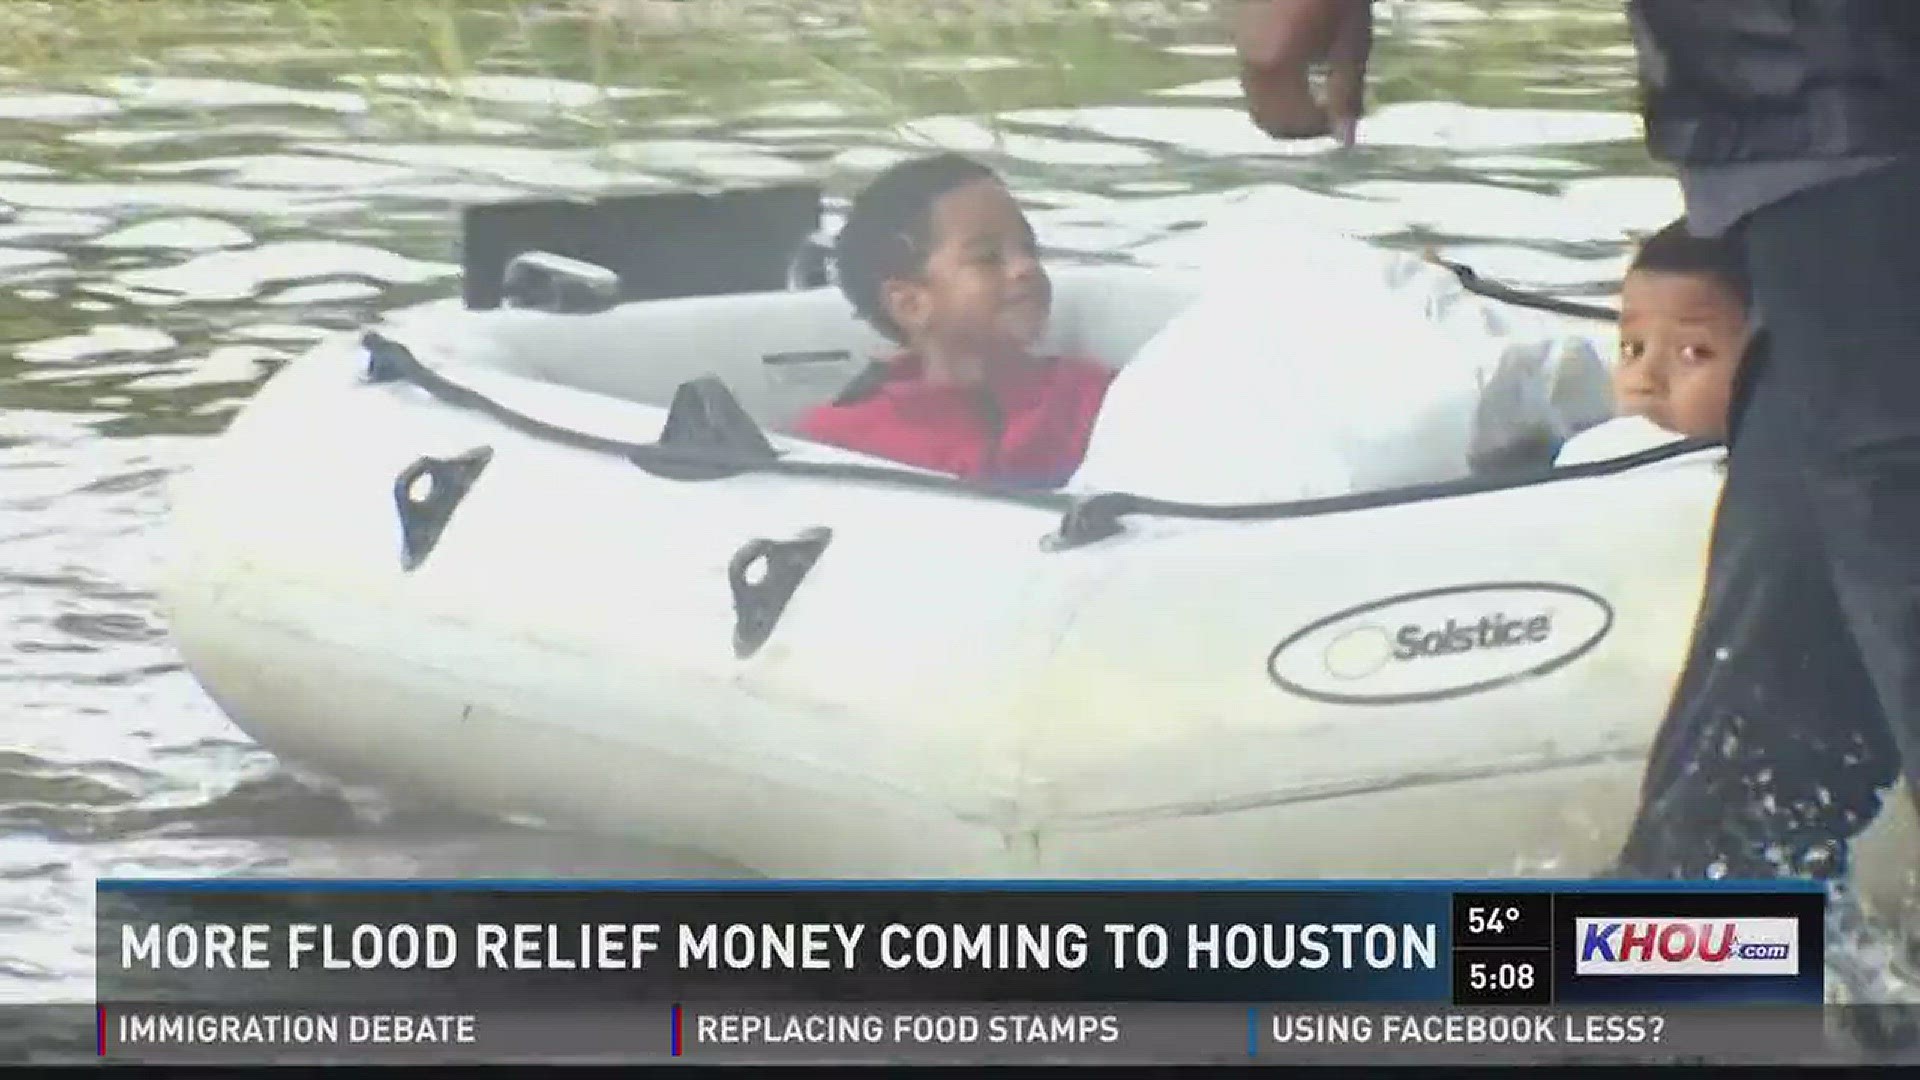 Government officials announced Tuesday that there would be more money towards flood relief coming into the Houston area.